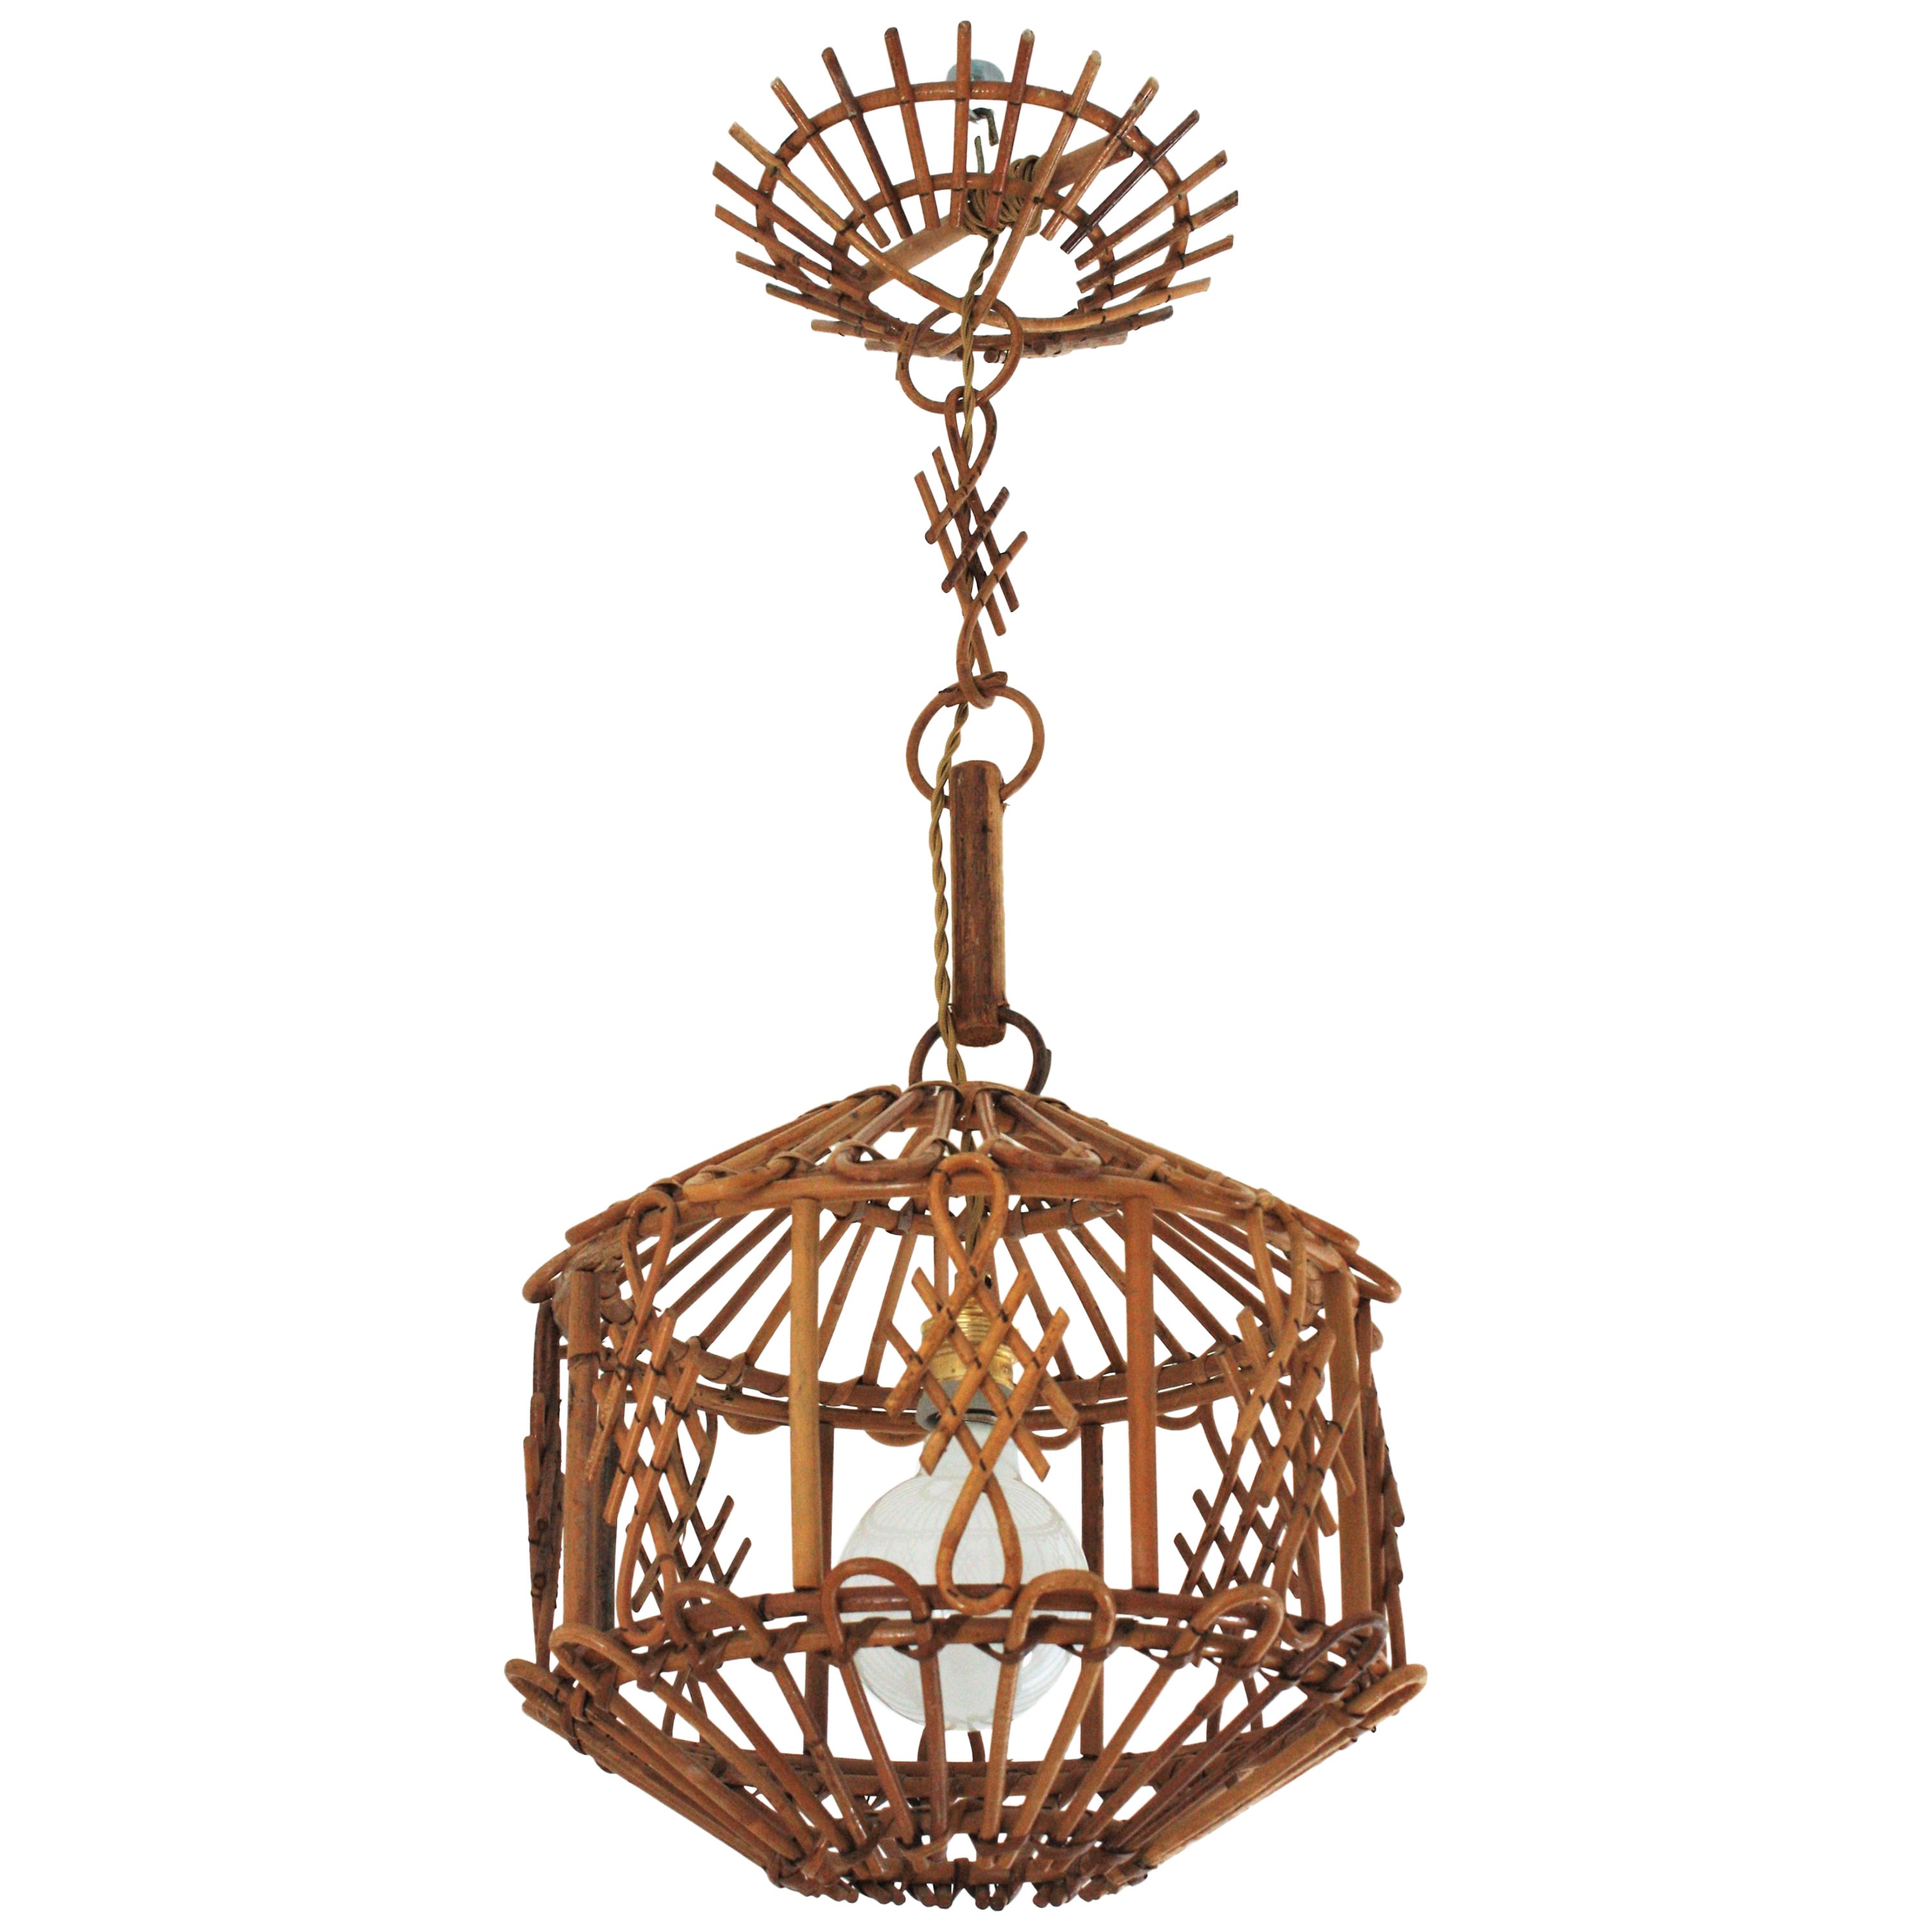 French Modernist Rattan Pendant Lantern / Hanging Light with Chinoiserie Accents